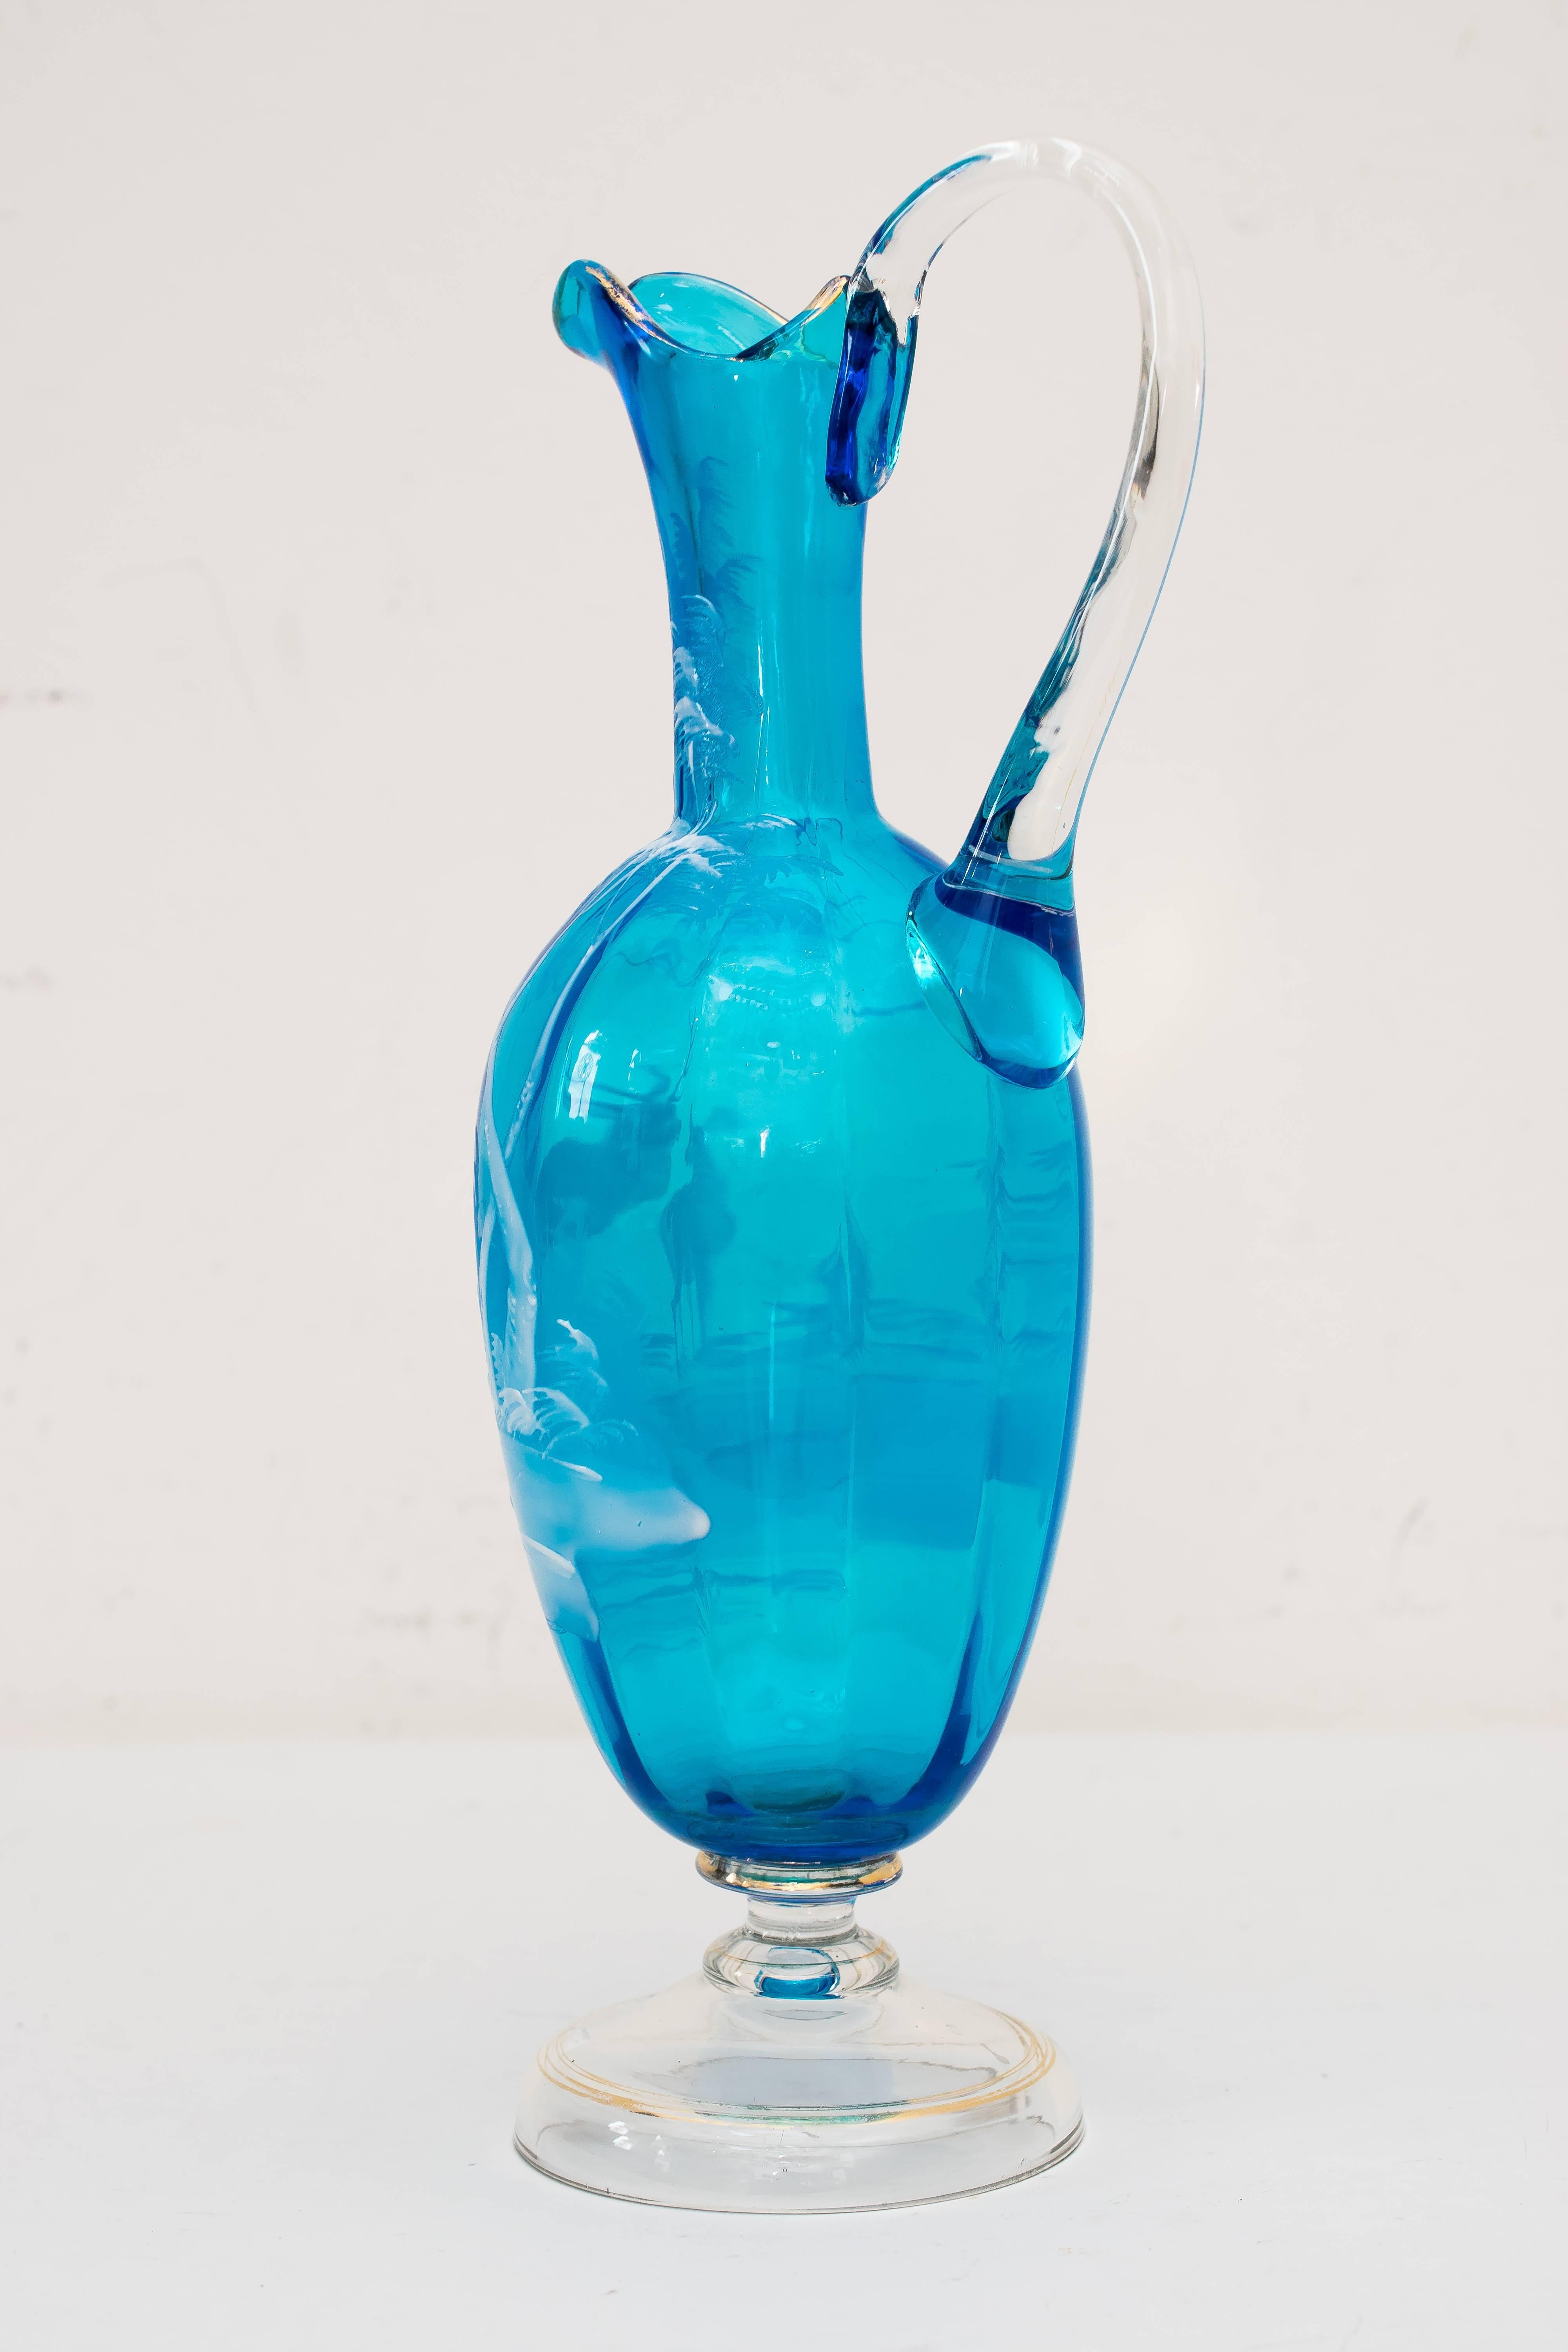 Beautiful blue carafe with hunting motif
Original condition.